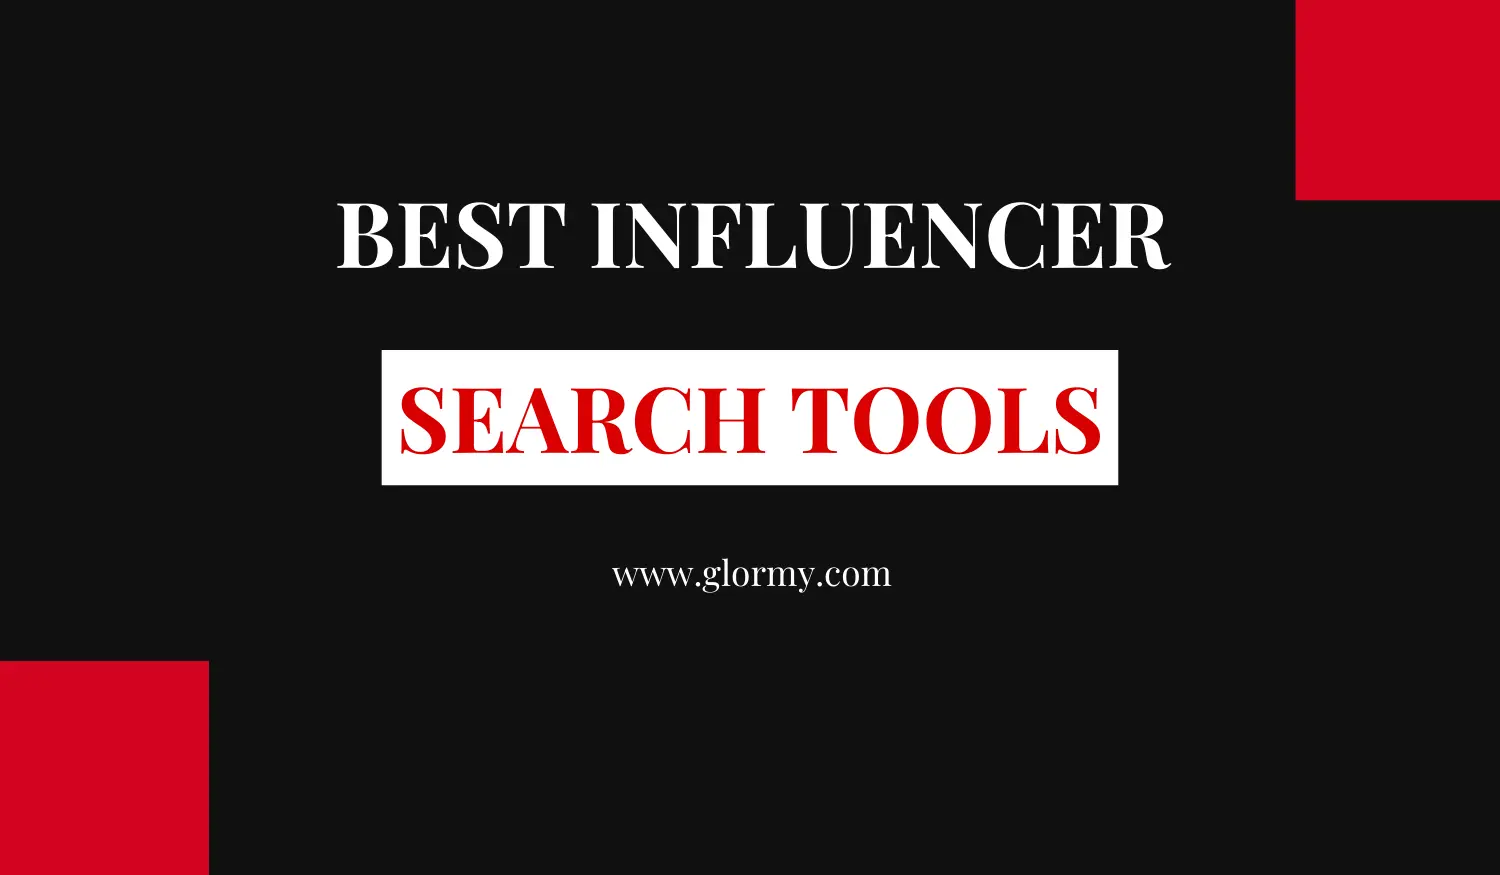 a black background with white text written Best Influencer Search Tools and two red boxes